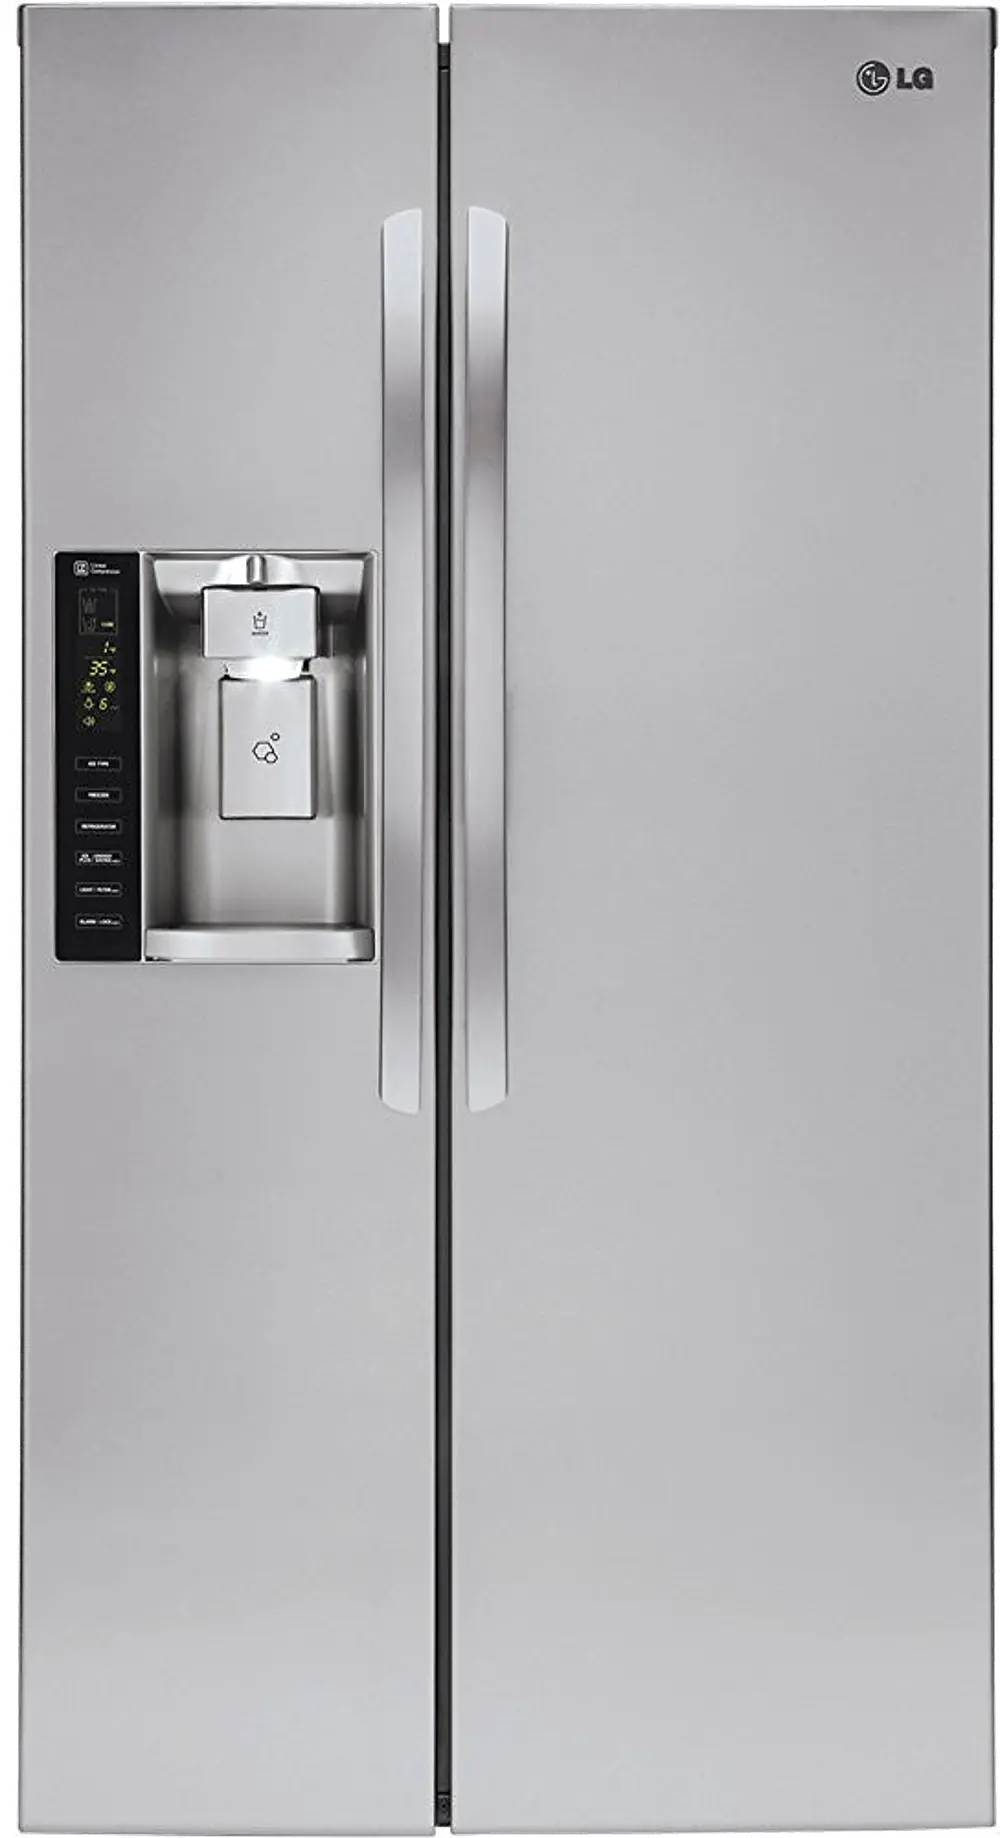 LSXS26326S LG 26.2 cu ft Side by Side Refrigerator - Stainless Steel-1